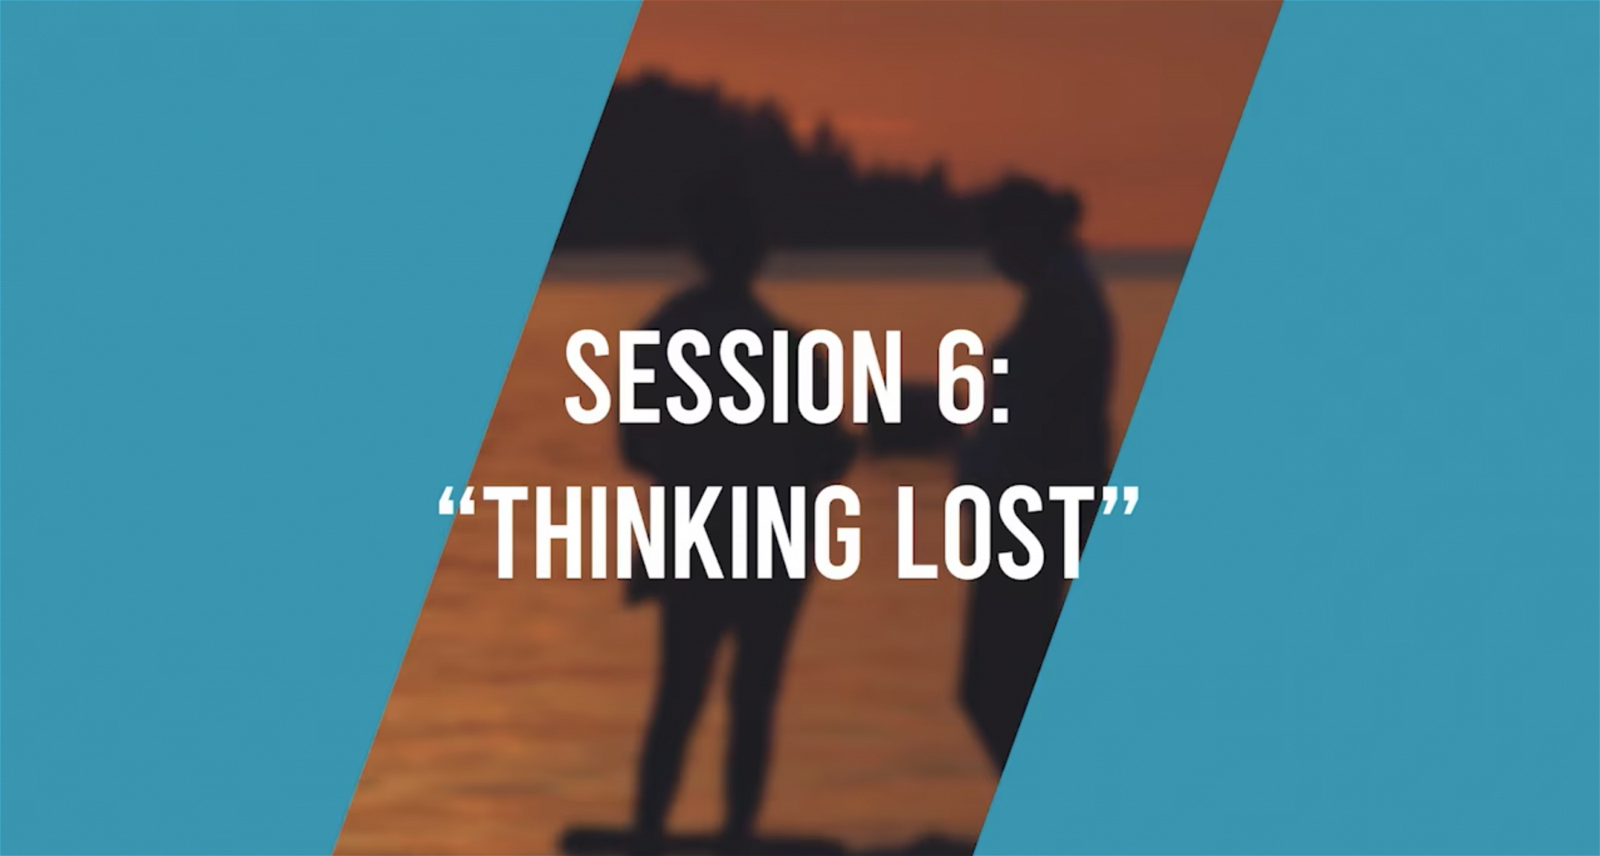 Session 6: Thinking Lost